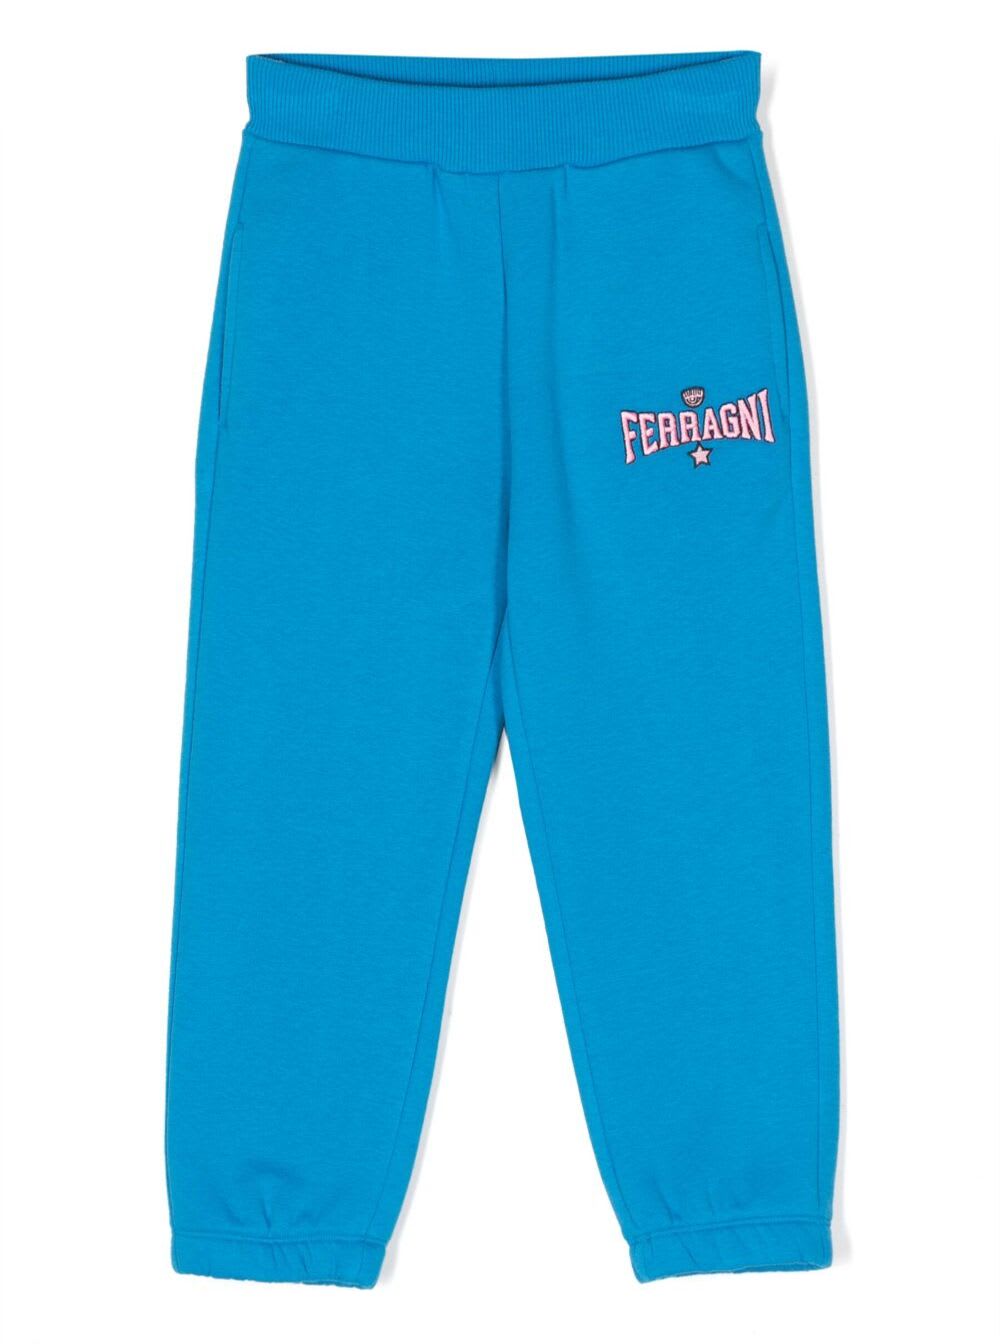 CHIARA FERRAGNI LIGHT BLUE JOGGER PANTS WITH LOGO LETTERING PRINT AT THE FRONT IN COTTON BLEND GIRL